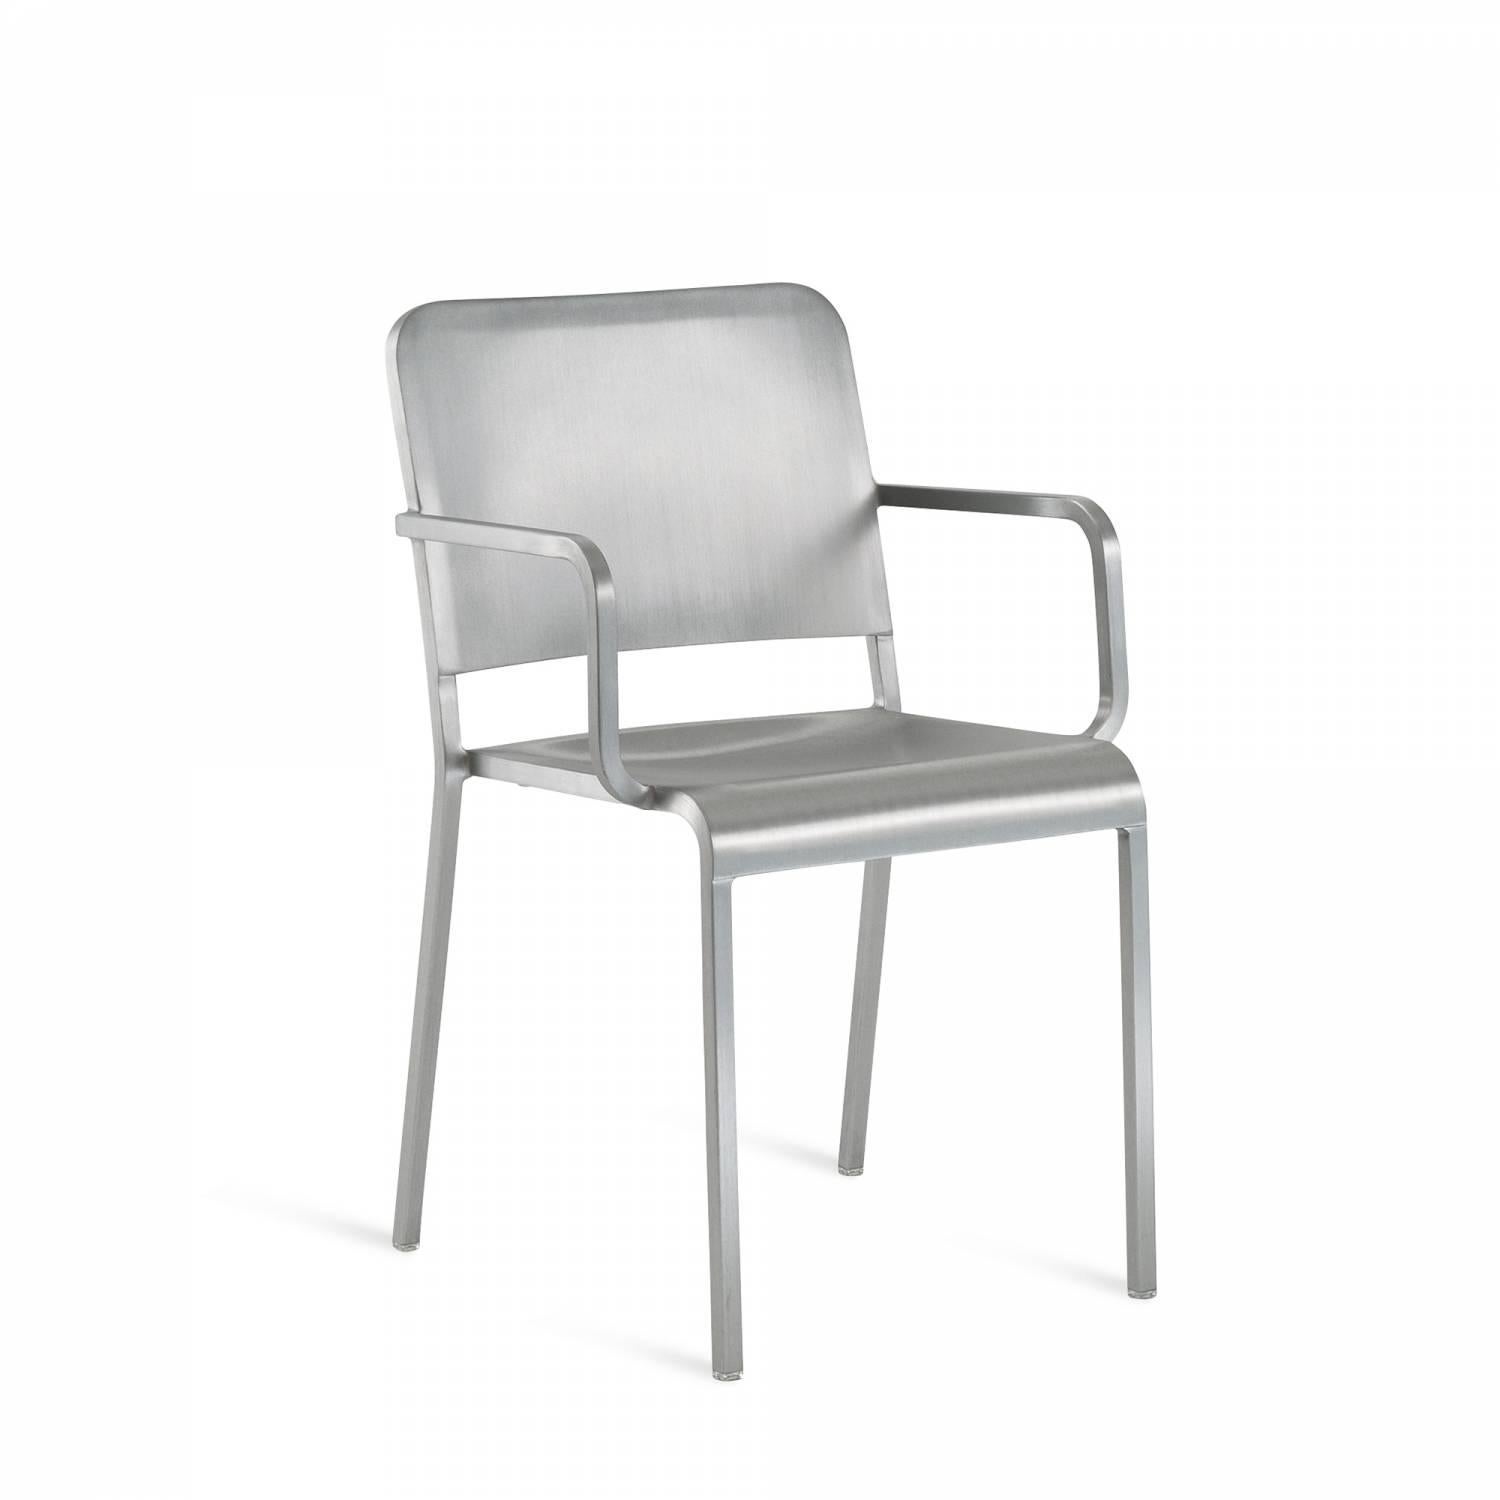 Emeco’s collaboration with Norman Foster resulted in the “20-06” chair. Foster envisioned a “neutral” chair -visually and physically lightweight. But the 20-06 is also super strong-tested to 445Kg. Lord Norman Foster said” I appreciate the anonymous